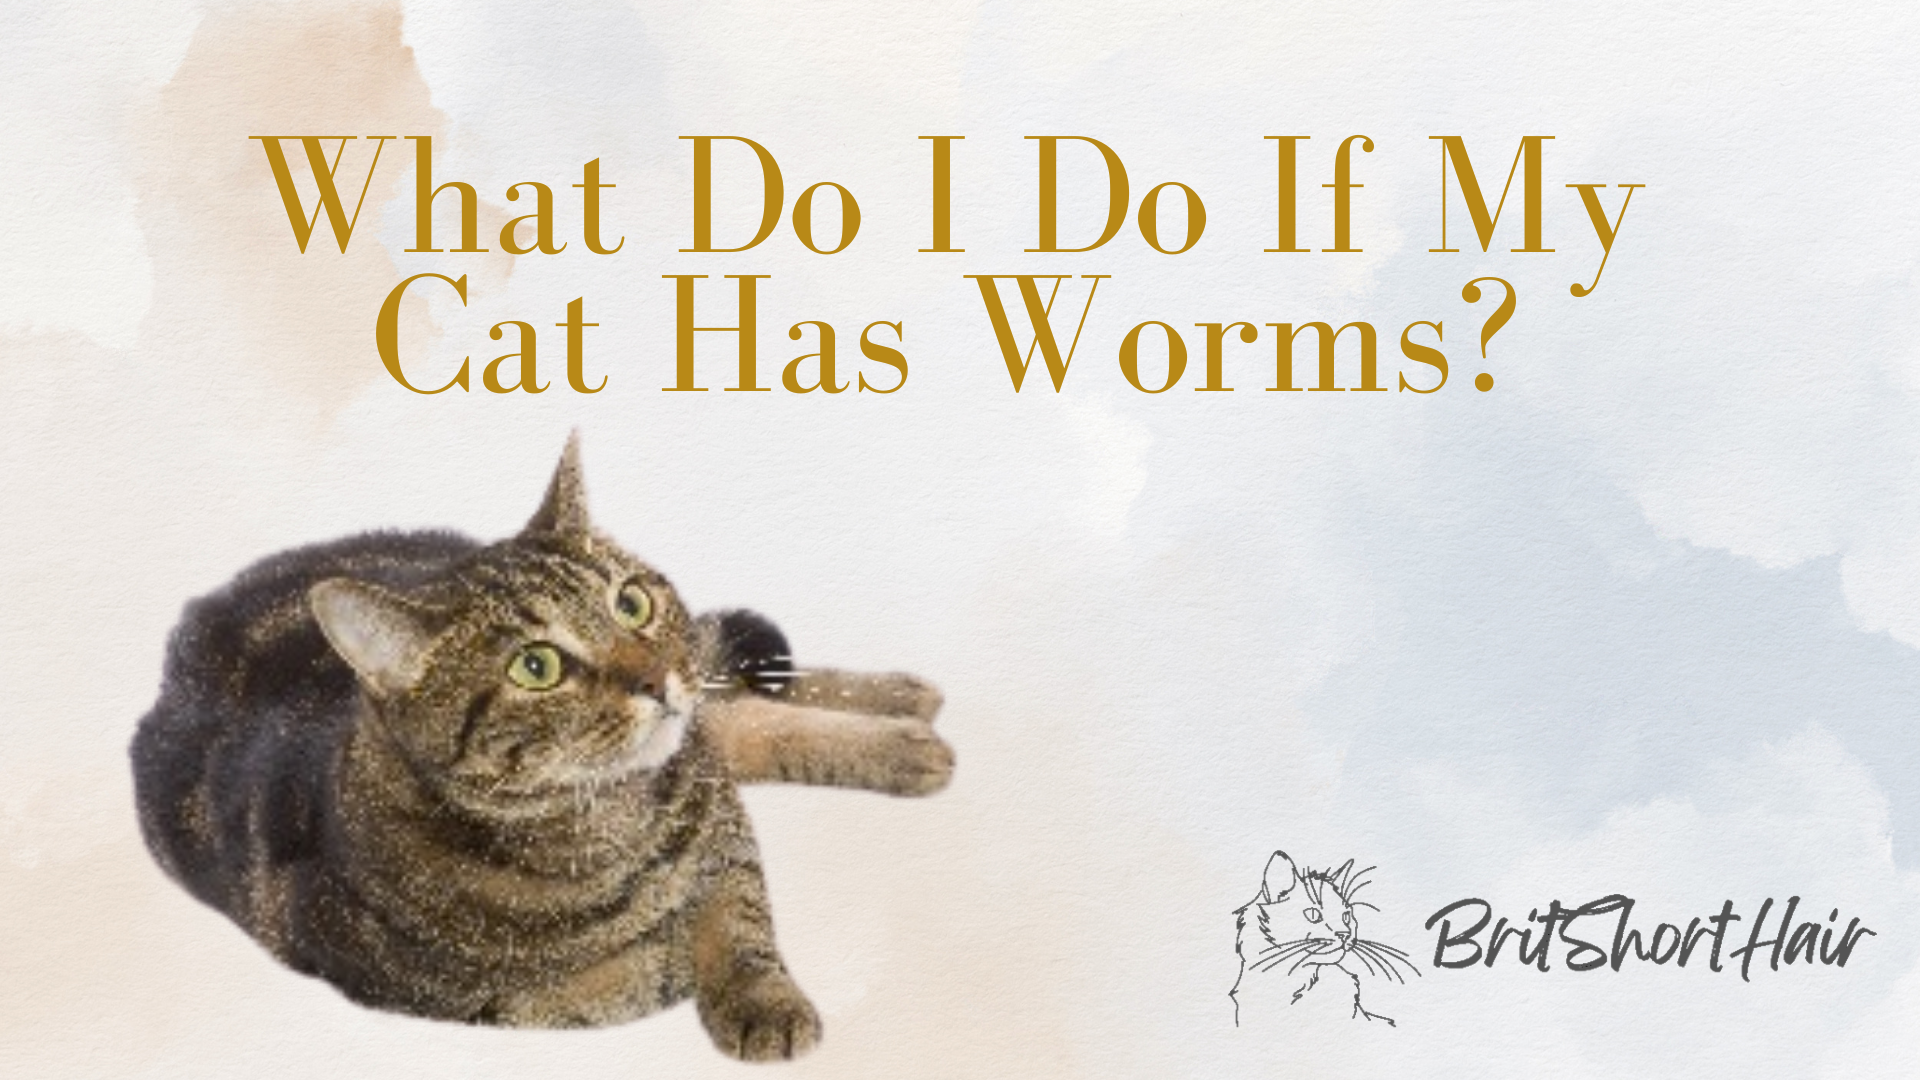 Cat with worms